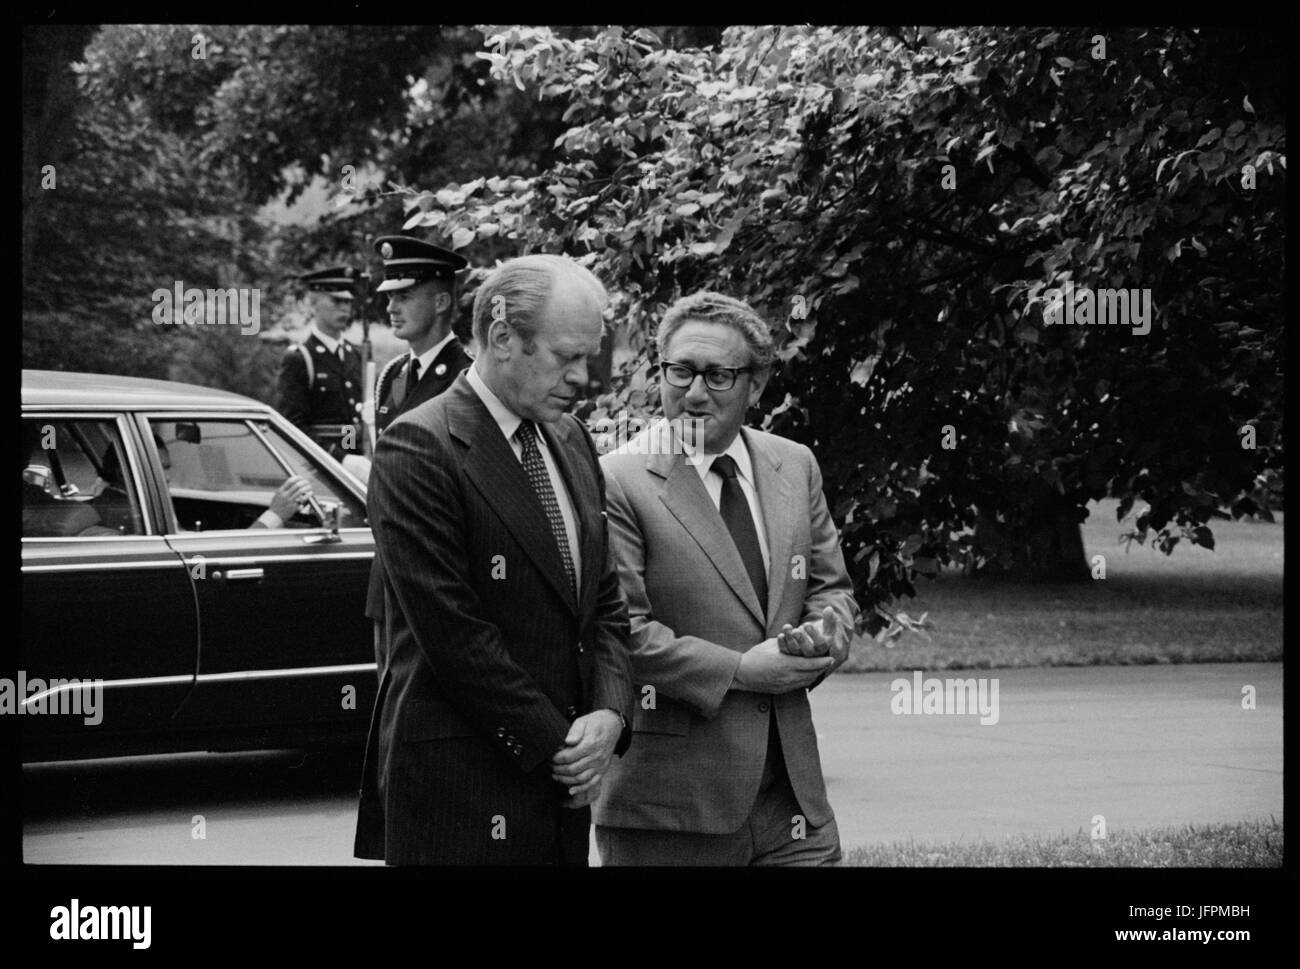 President Gerald Ford and Secretary of State Henry Kissinger, conversing, on the grounds of the White House, Washington, D.C., August 16, 1975. Photo by Thomas O'Halloran. Stock Photo